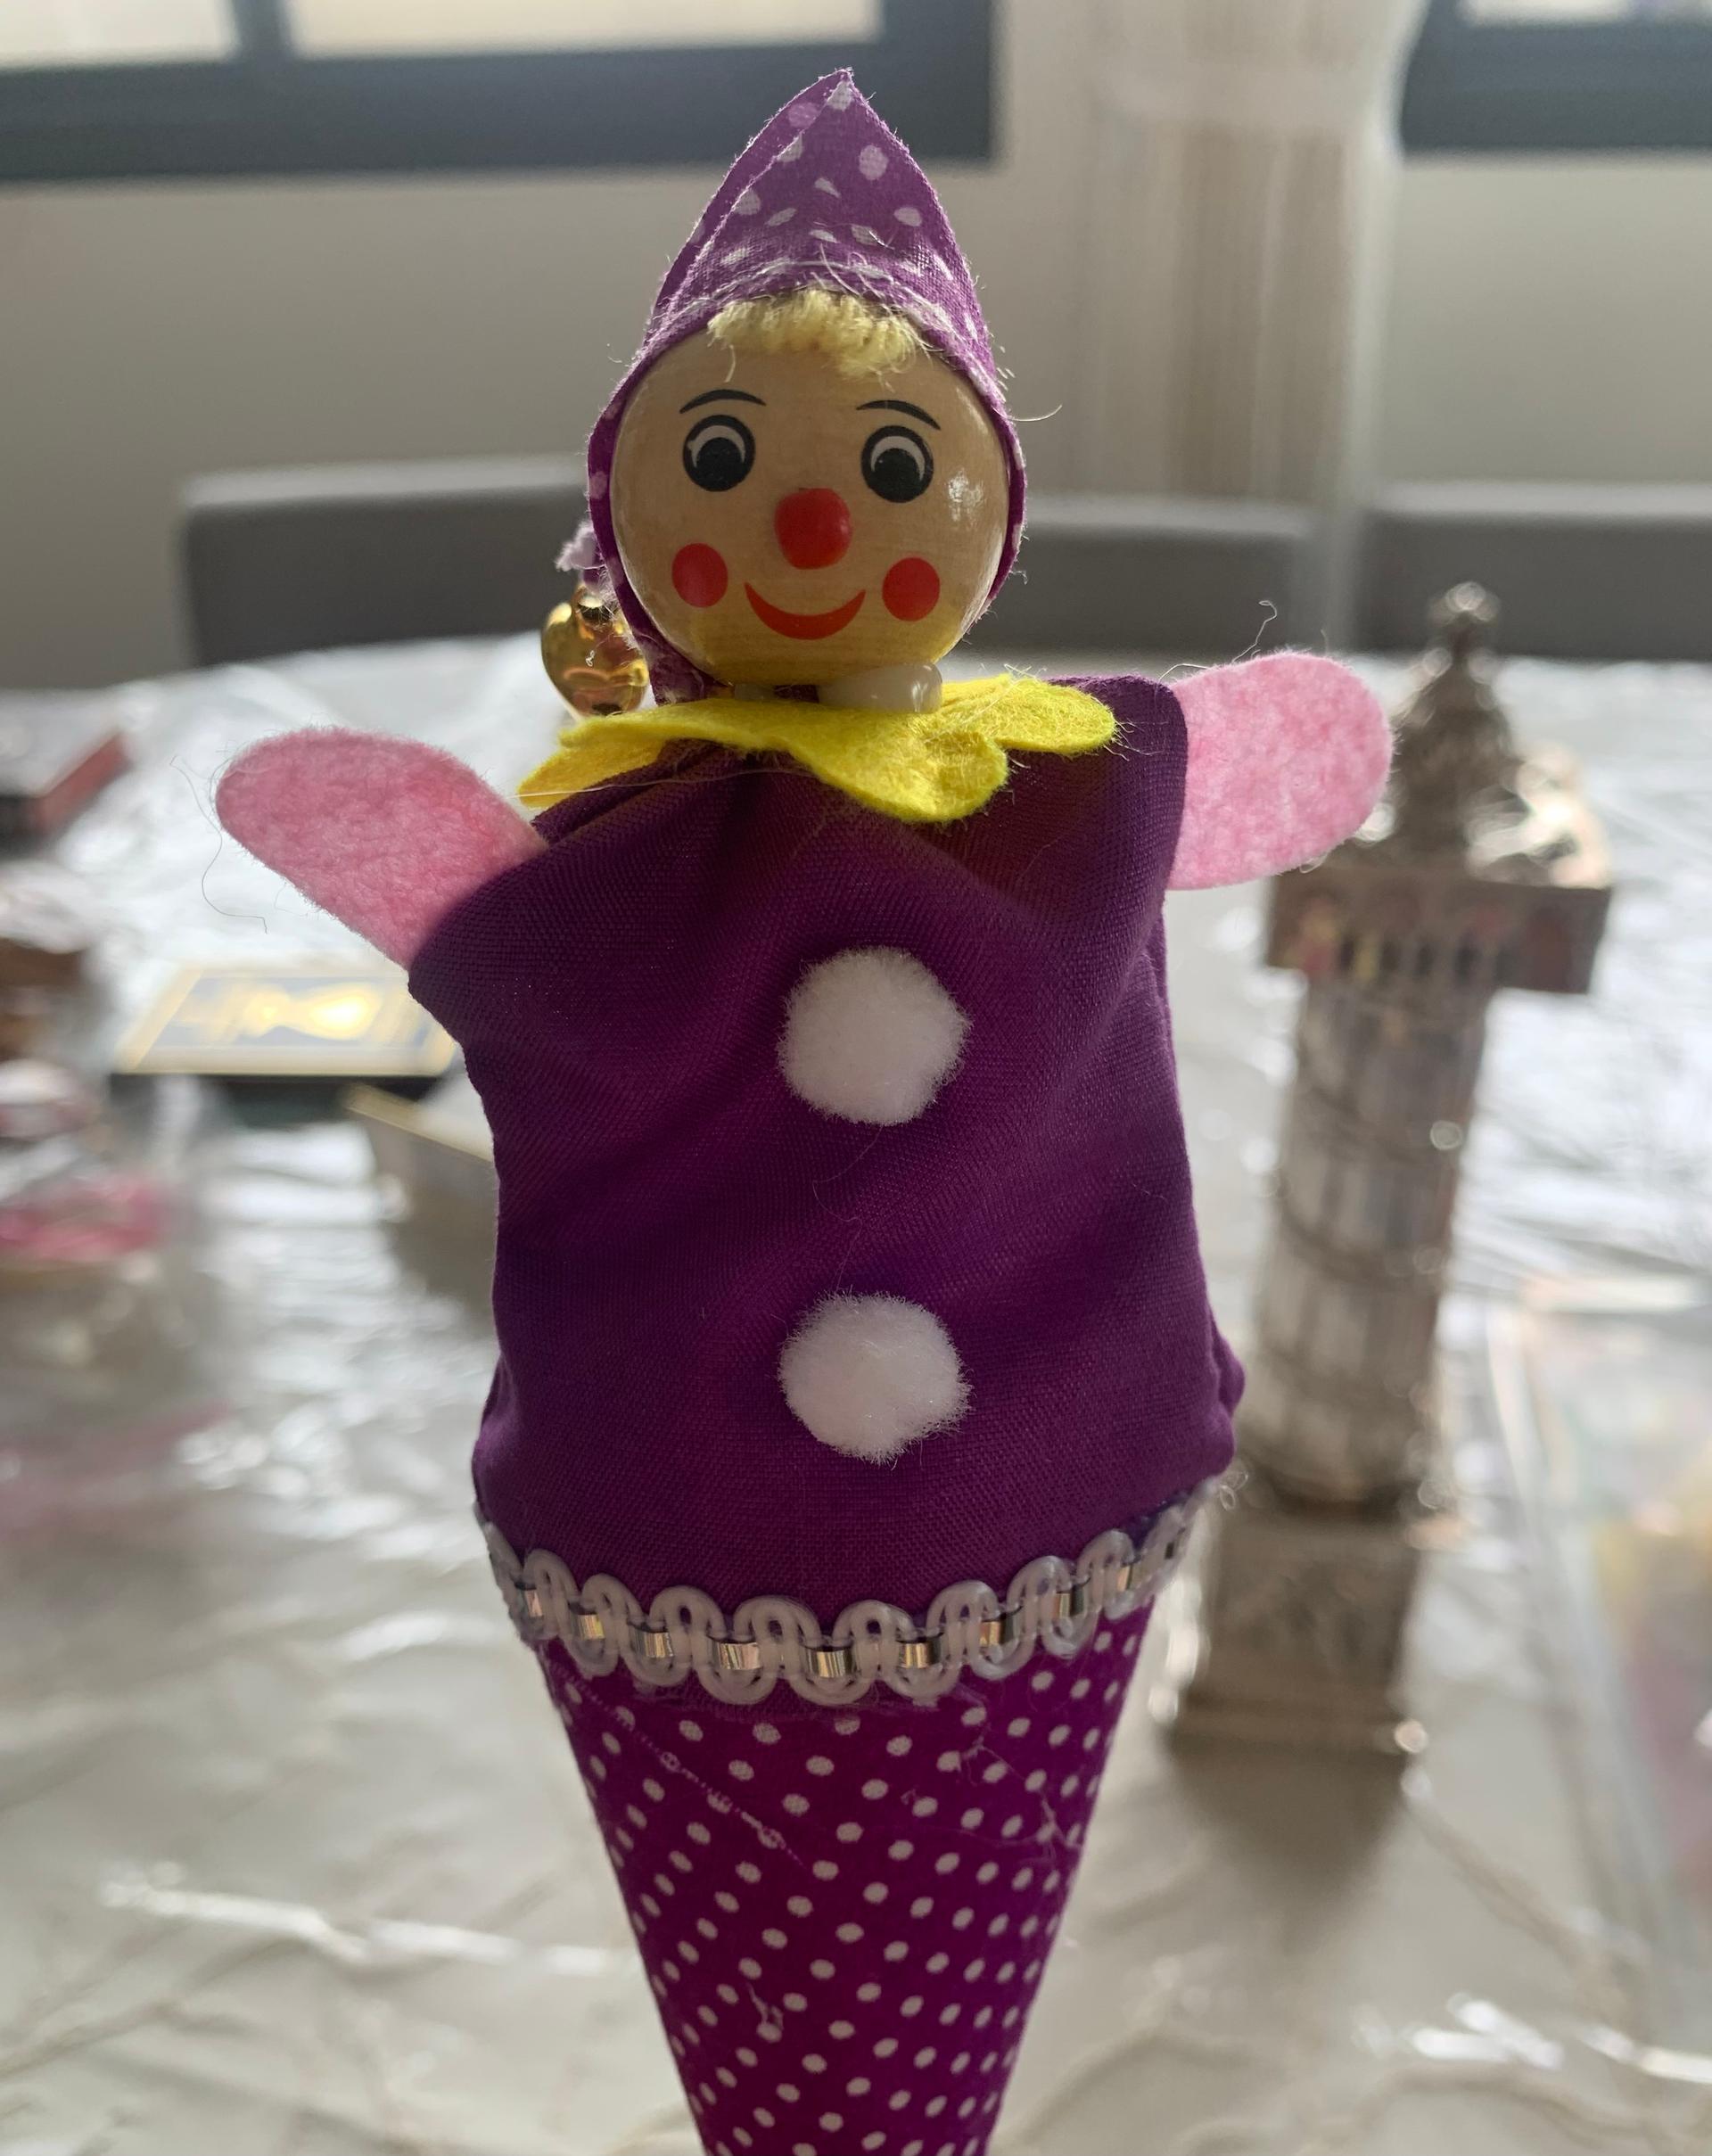 A festive Purim noisemaker used during the reading of the Book of Esther on Purim.